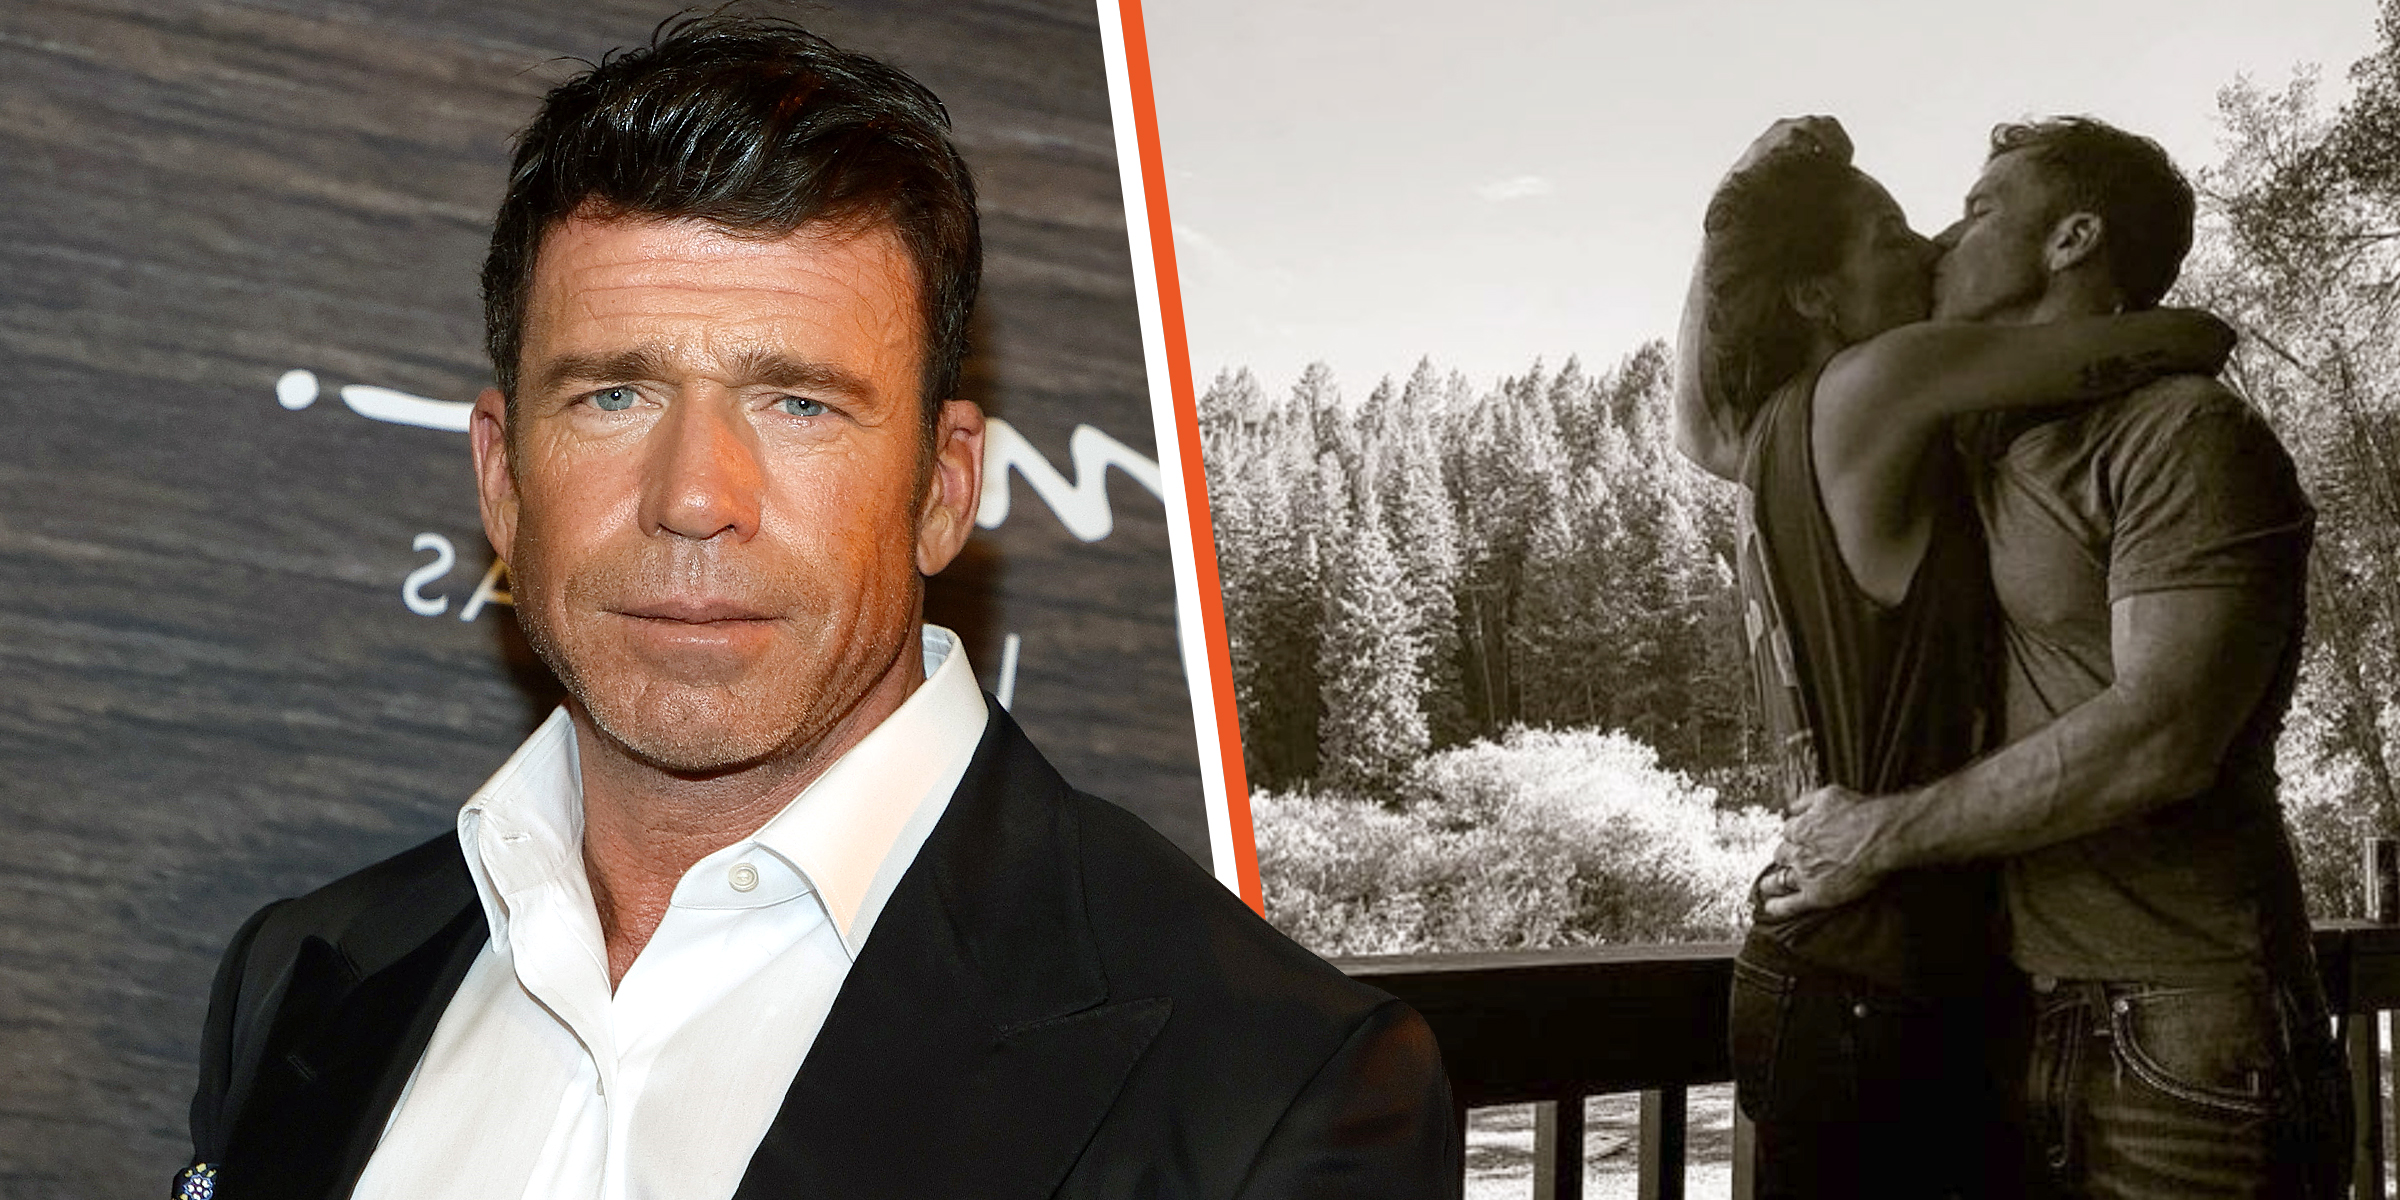 Taylor Sheridan | Taylor Sheridan and His Wife Nicole | Source: Instagram.com/nicsheridanofficial | Getty Images